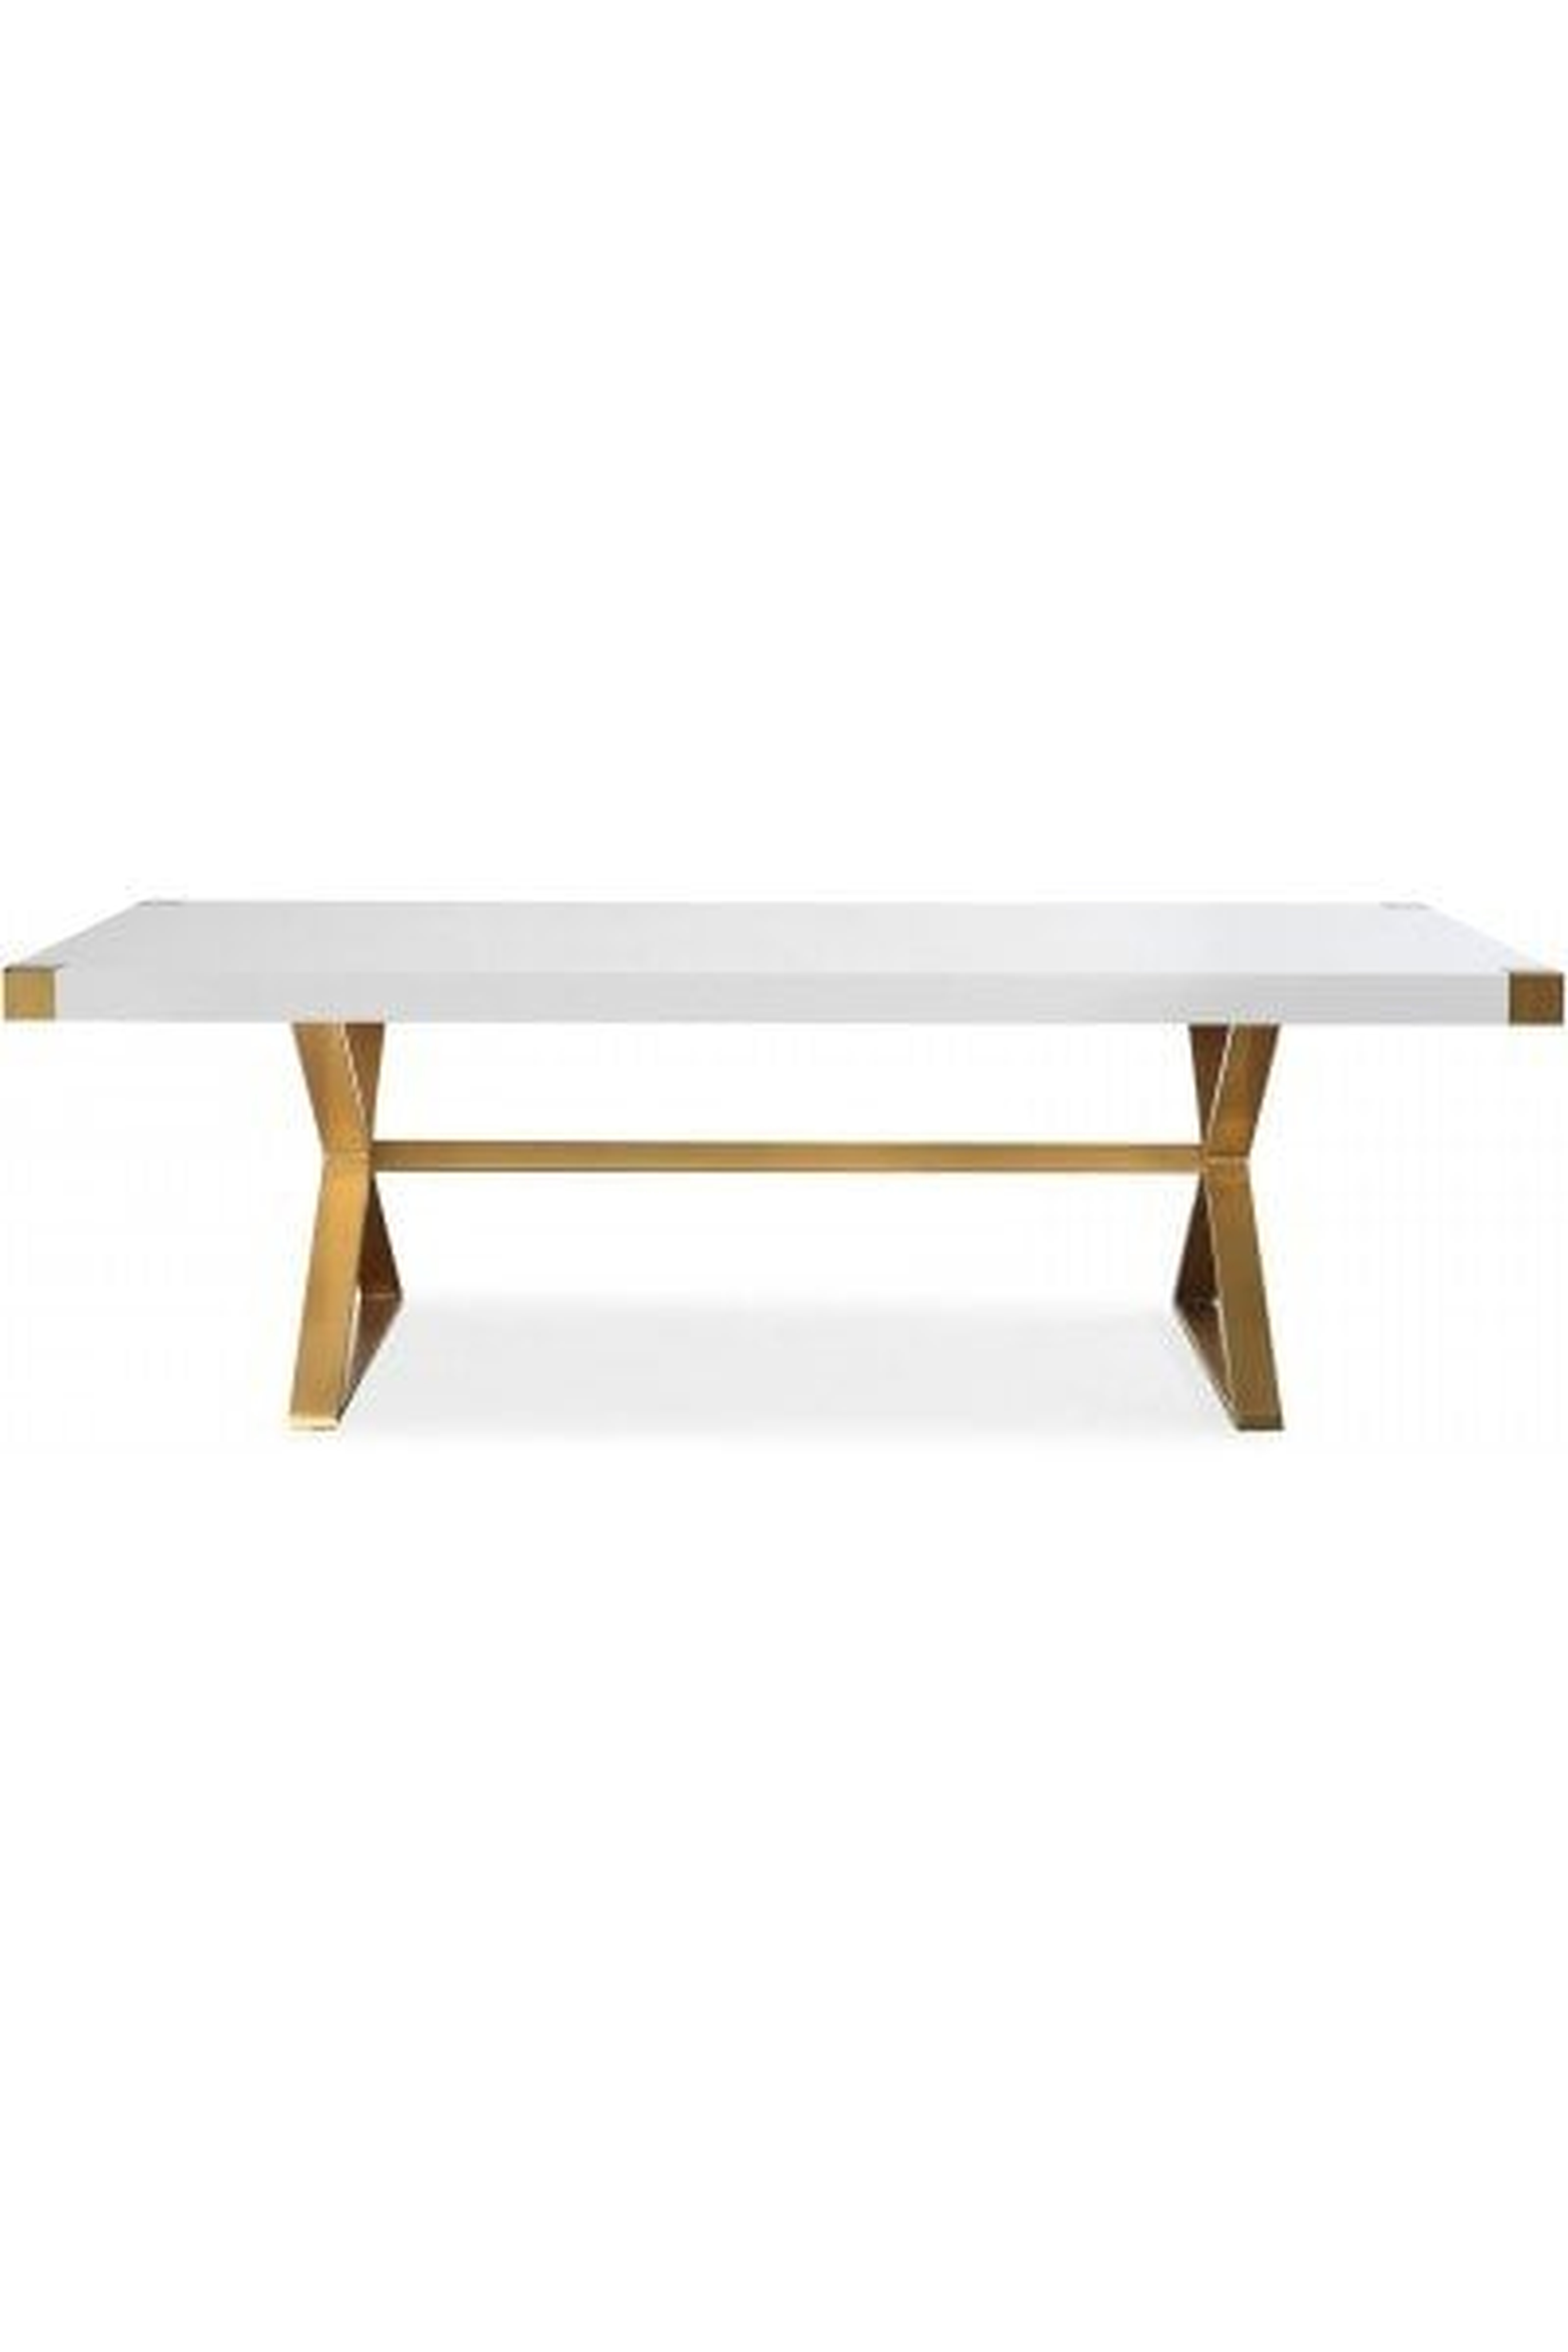 Adeline White Lacquer Dining Table - Maren Home